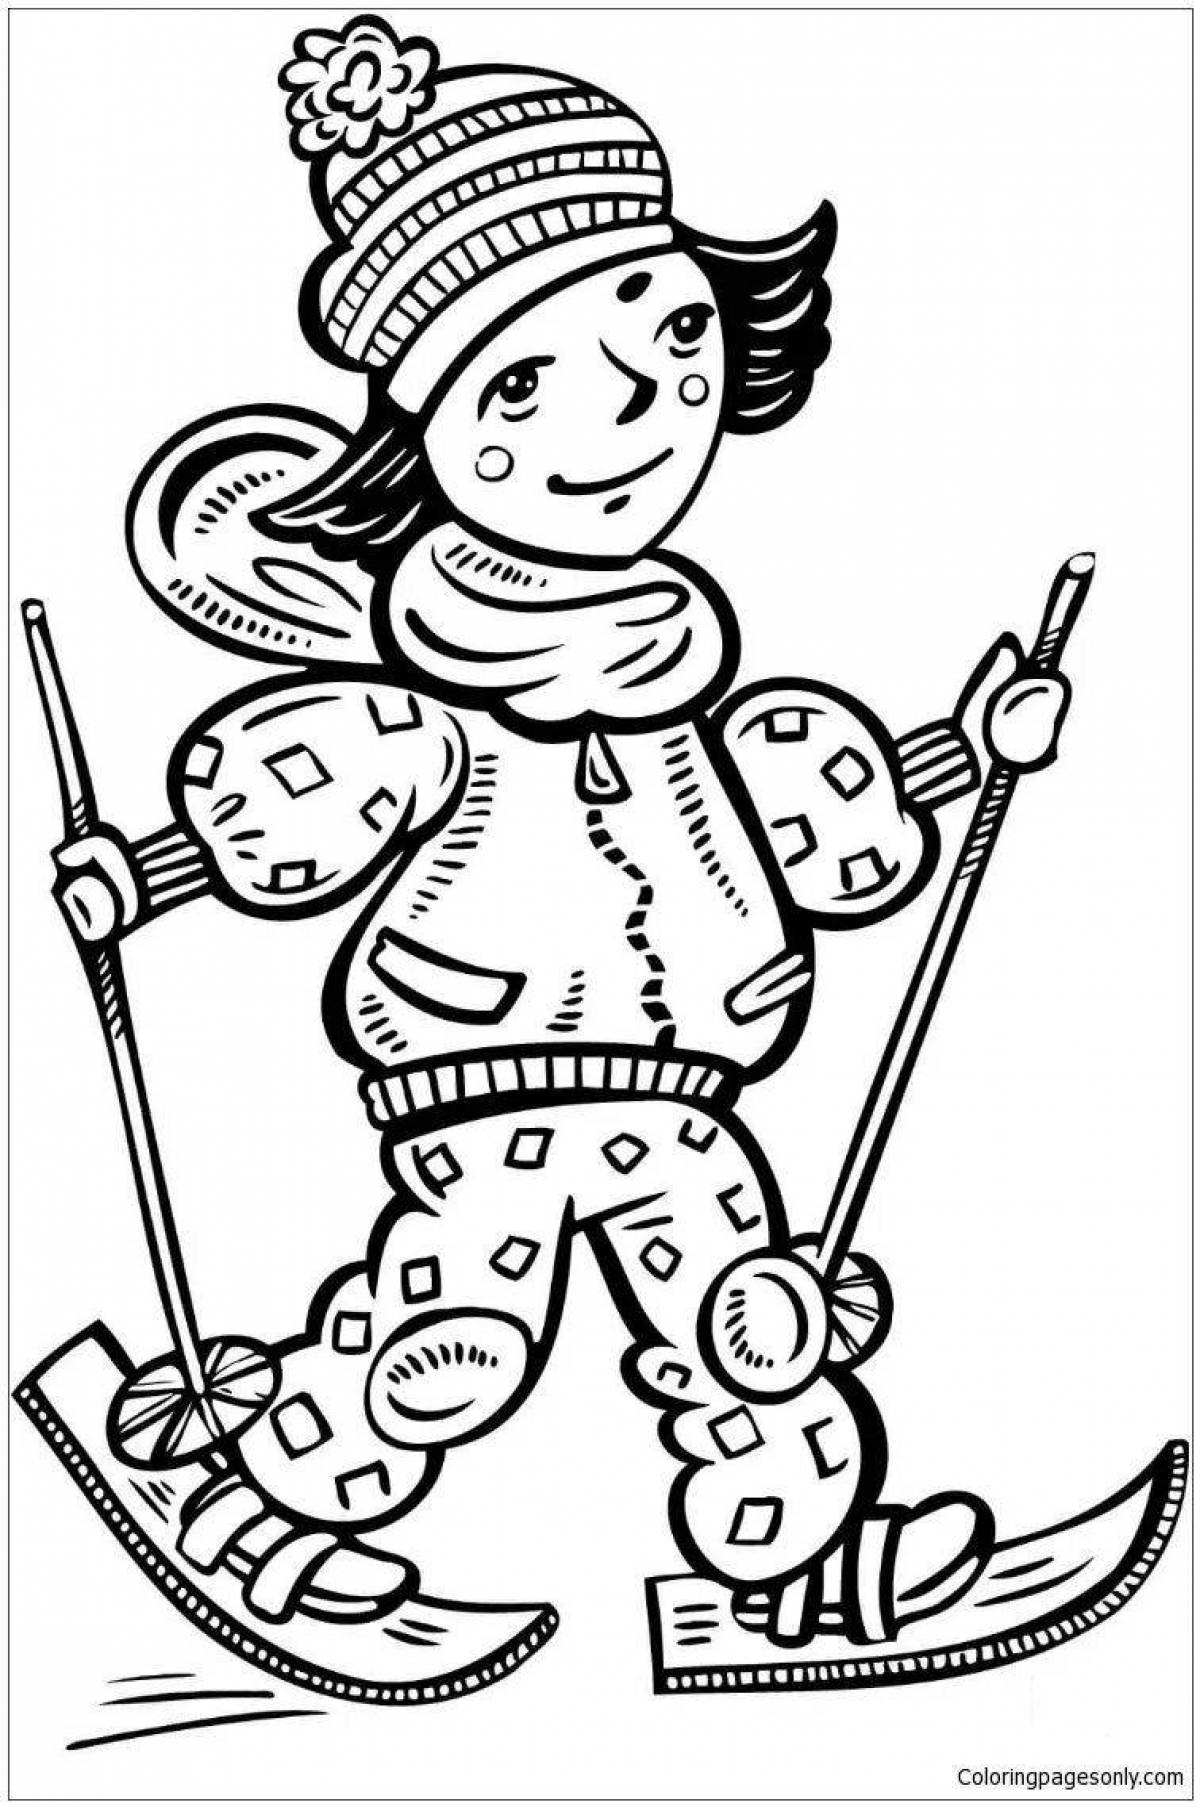 Coloring page cheerful boy on skis